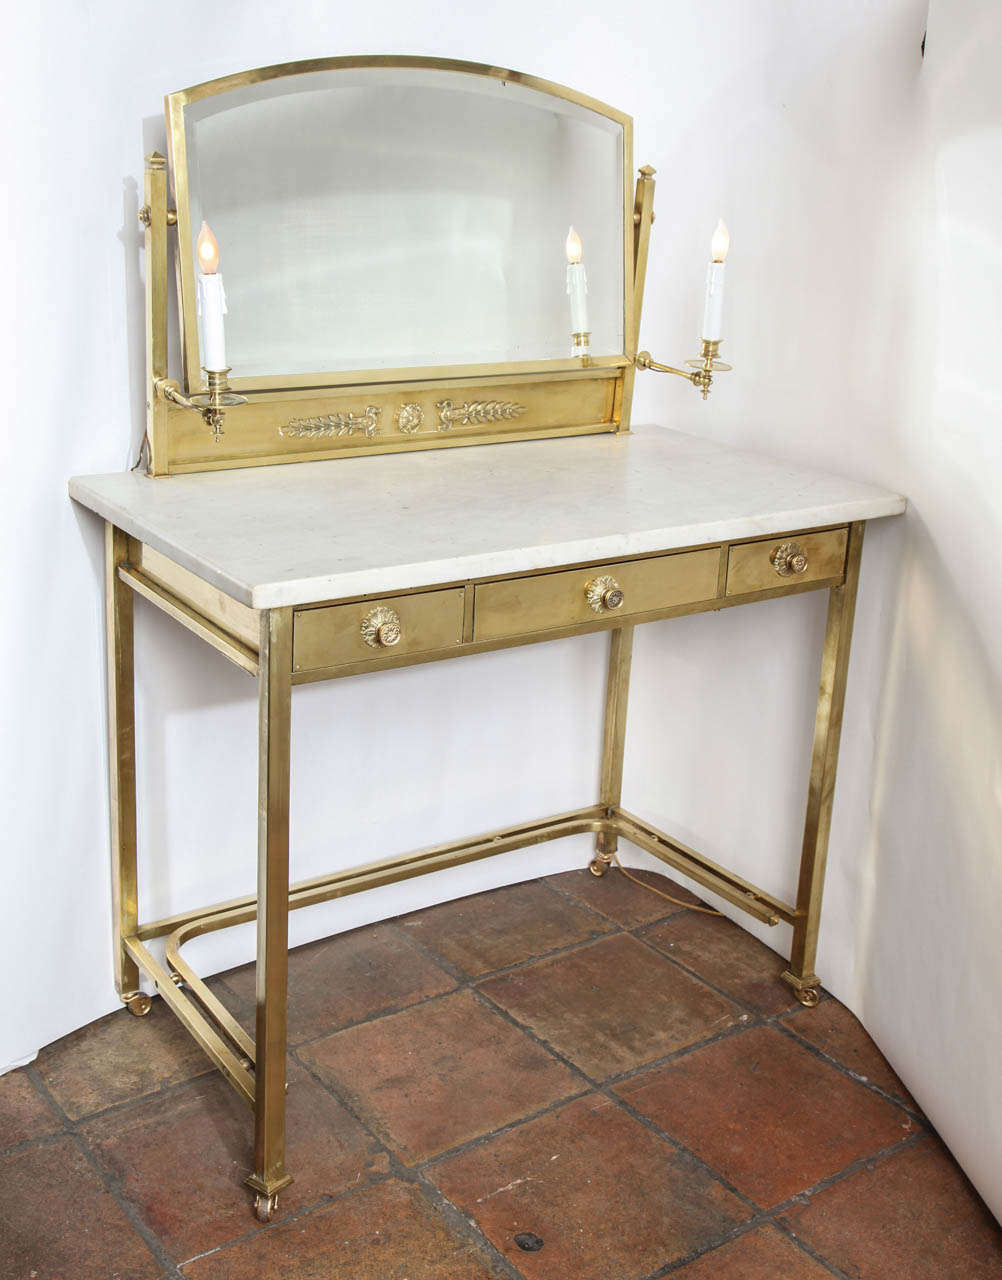 A elegant and timeless Masion Jansen white marble top vanity in brass with three drawers and a swivel mirror (19.5